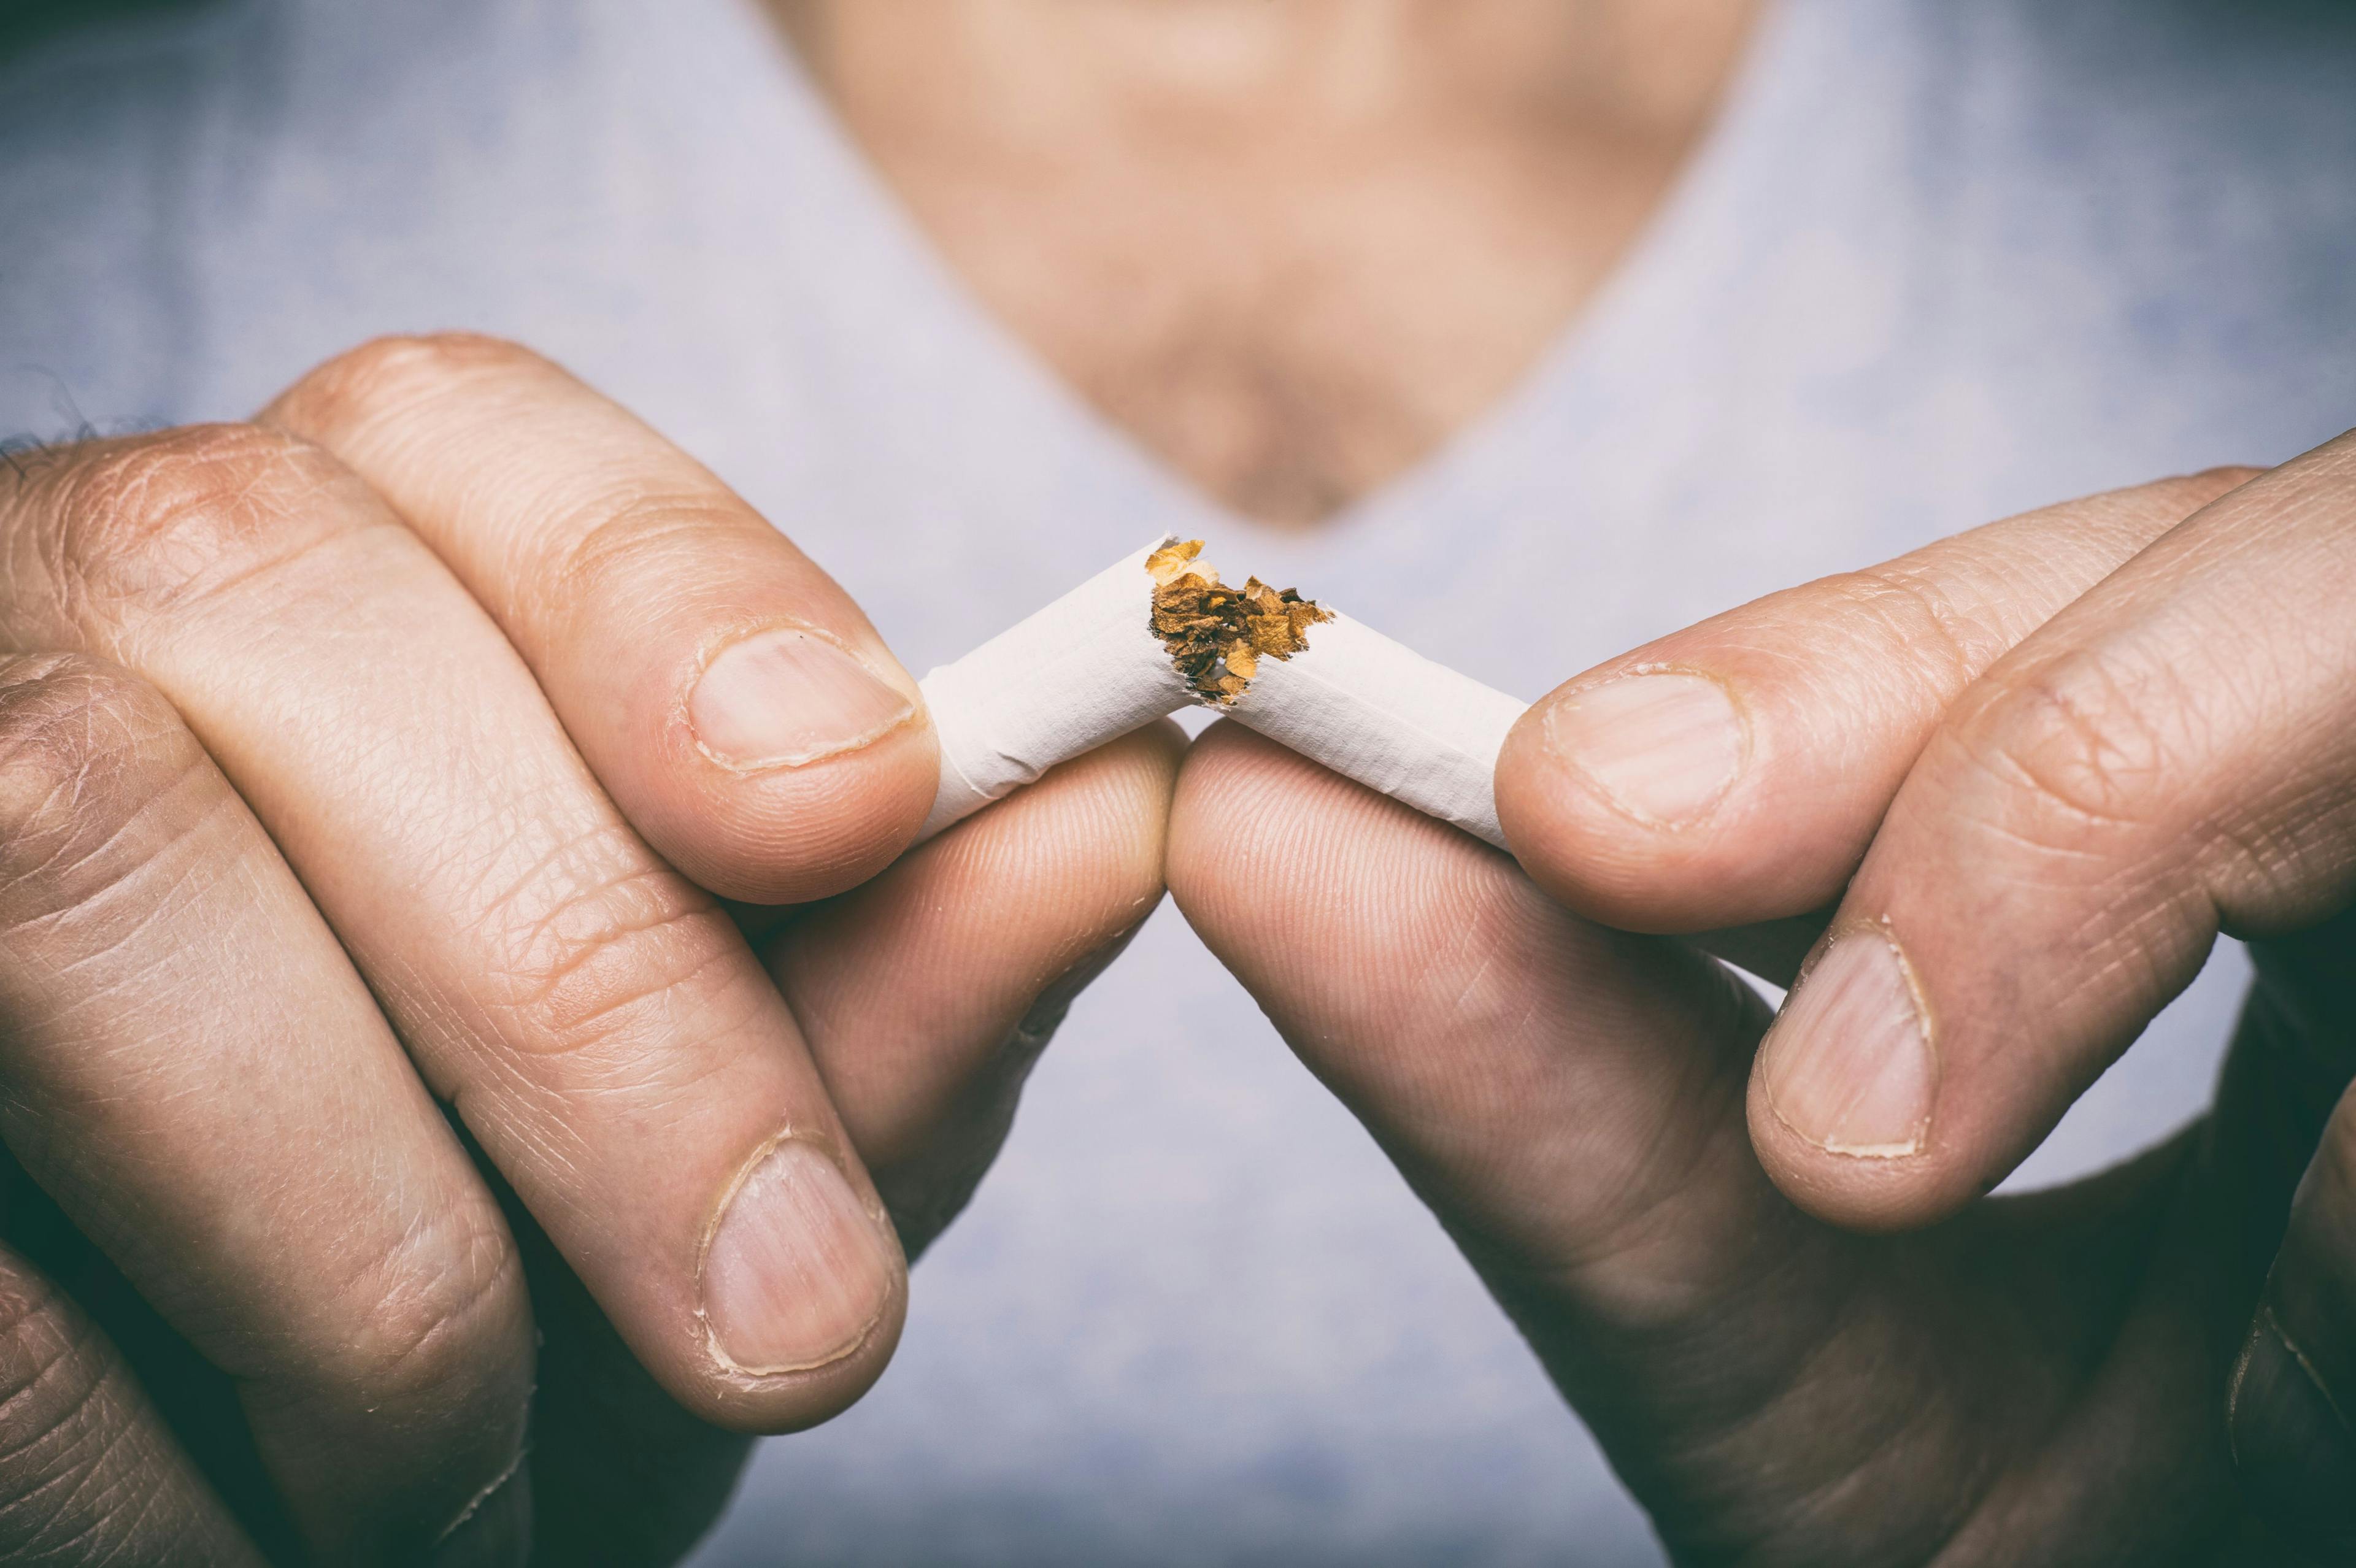 Independents, Community Pharmacies Can Get Involved in Tobacco Cessation Programs